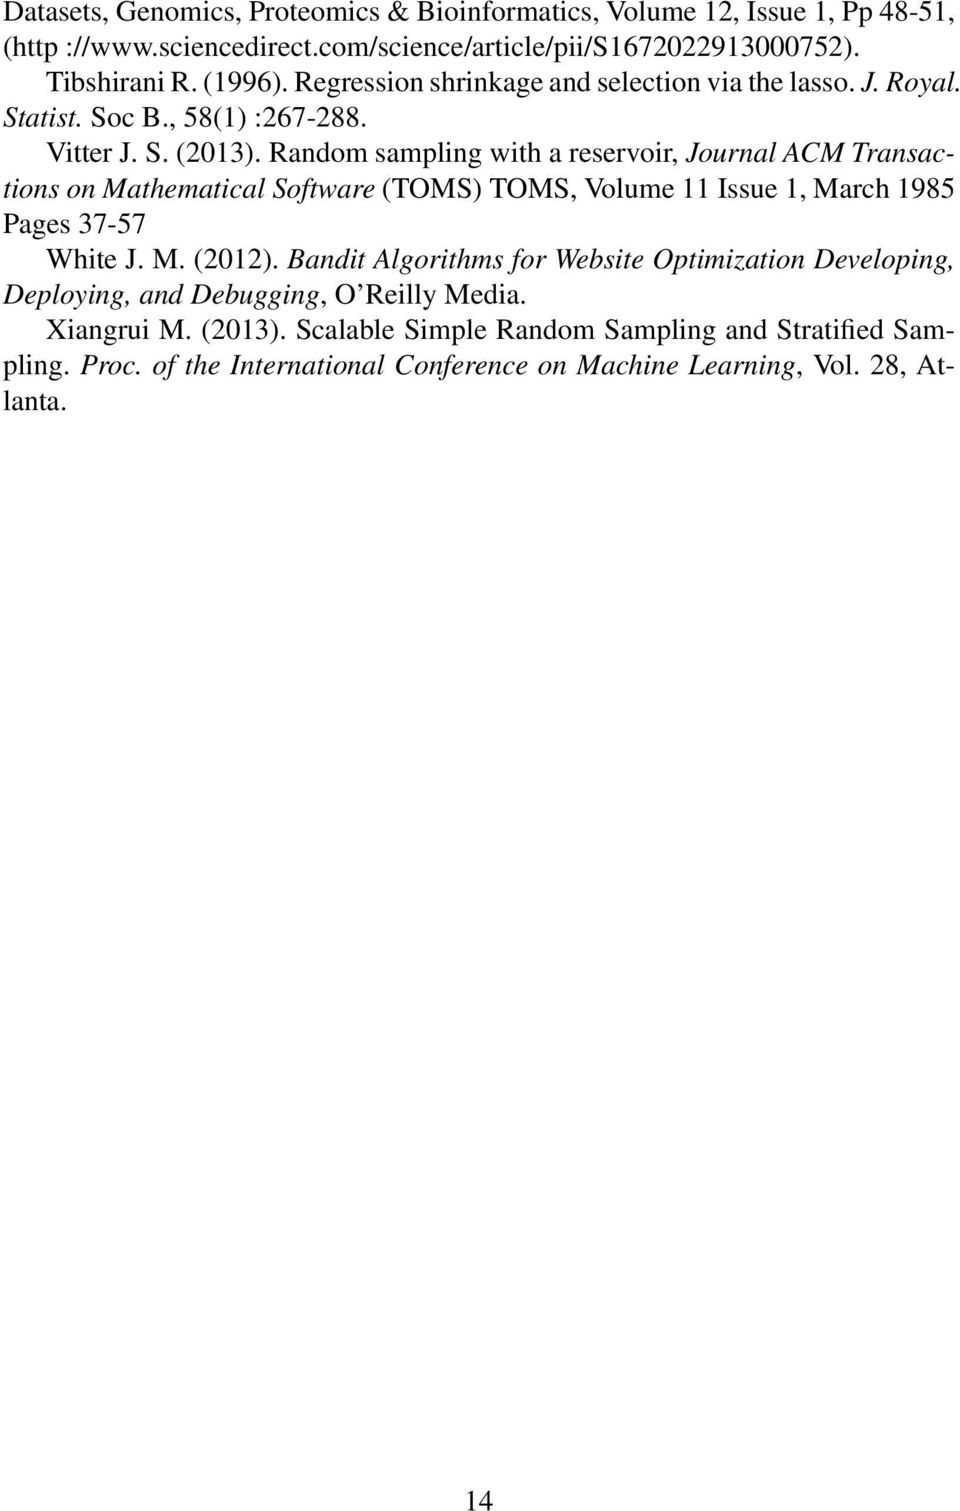 Random sampling with a reservoir, Journal ACM Transactions on Mathematical Software (TOMS) TOMS, Volume 11 Issue 1, March 1985 Pages 37-57 White J. M. (2012).